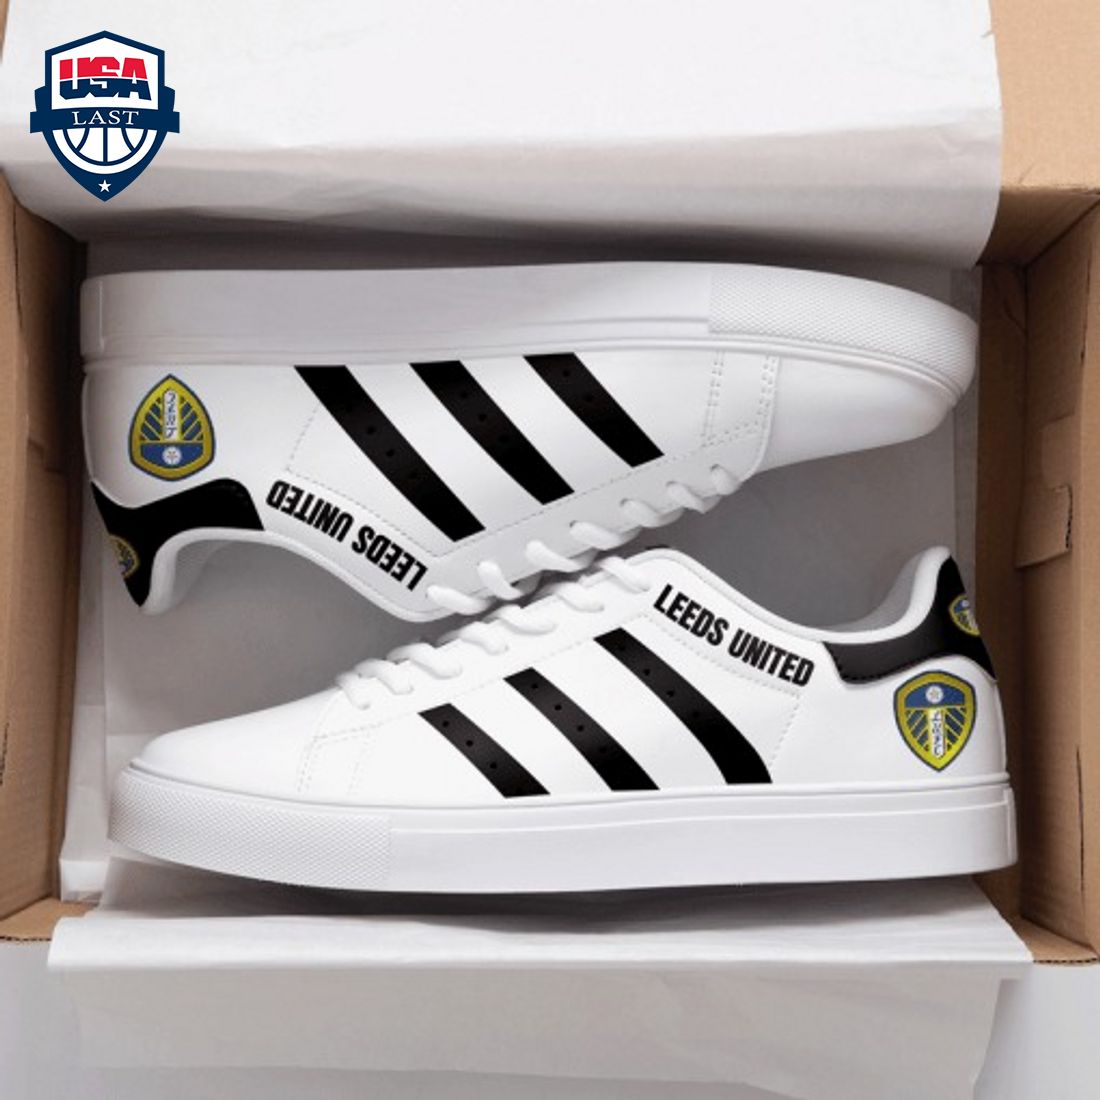 Leeds United FC Black Stripes Stan Smith Low Top Shoes - Damn good